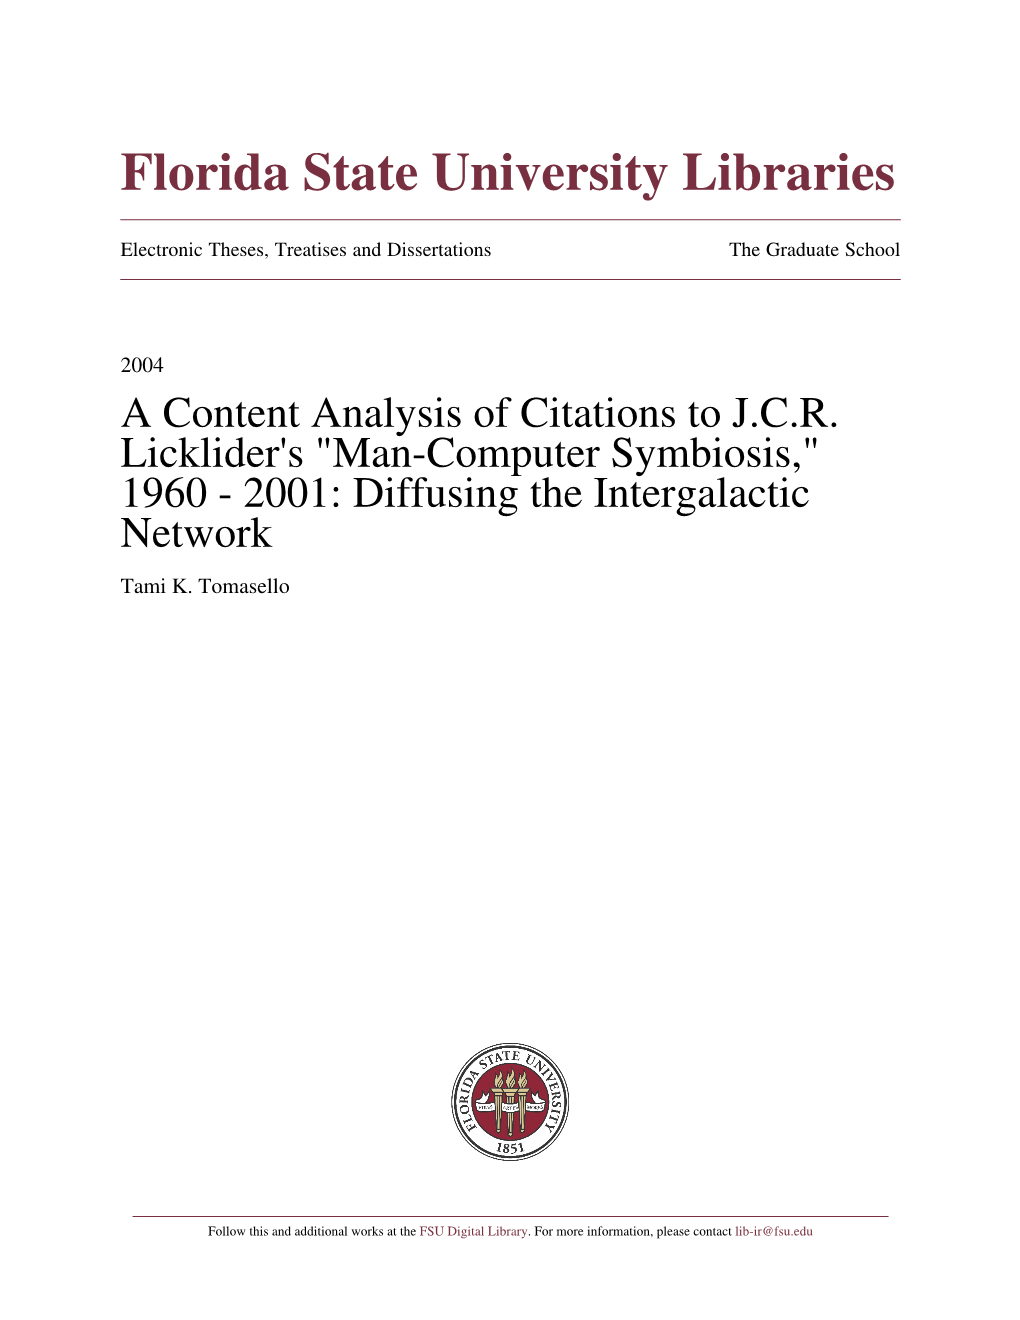 A Content Analysis of Citations to JCR